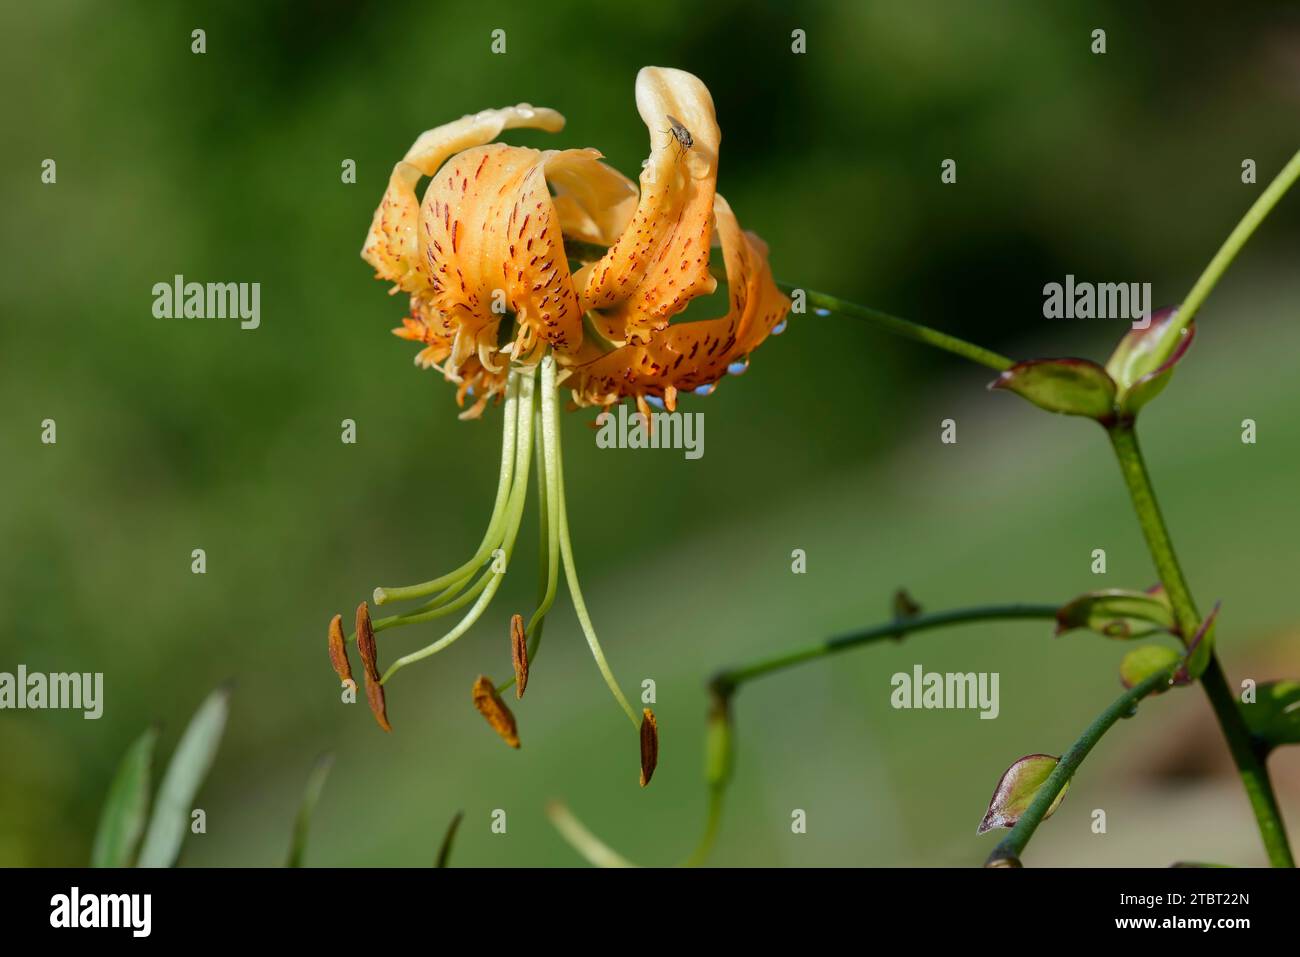 Giant Turk's cap lily (Lilium henryi), flower, occurrence in China Stock Photo